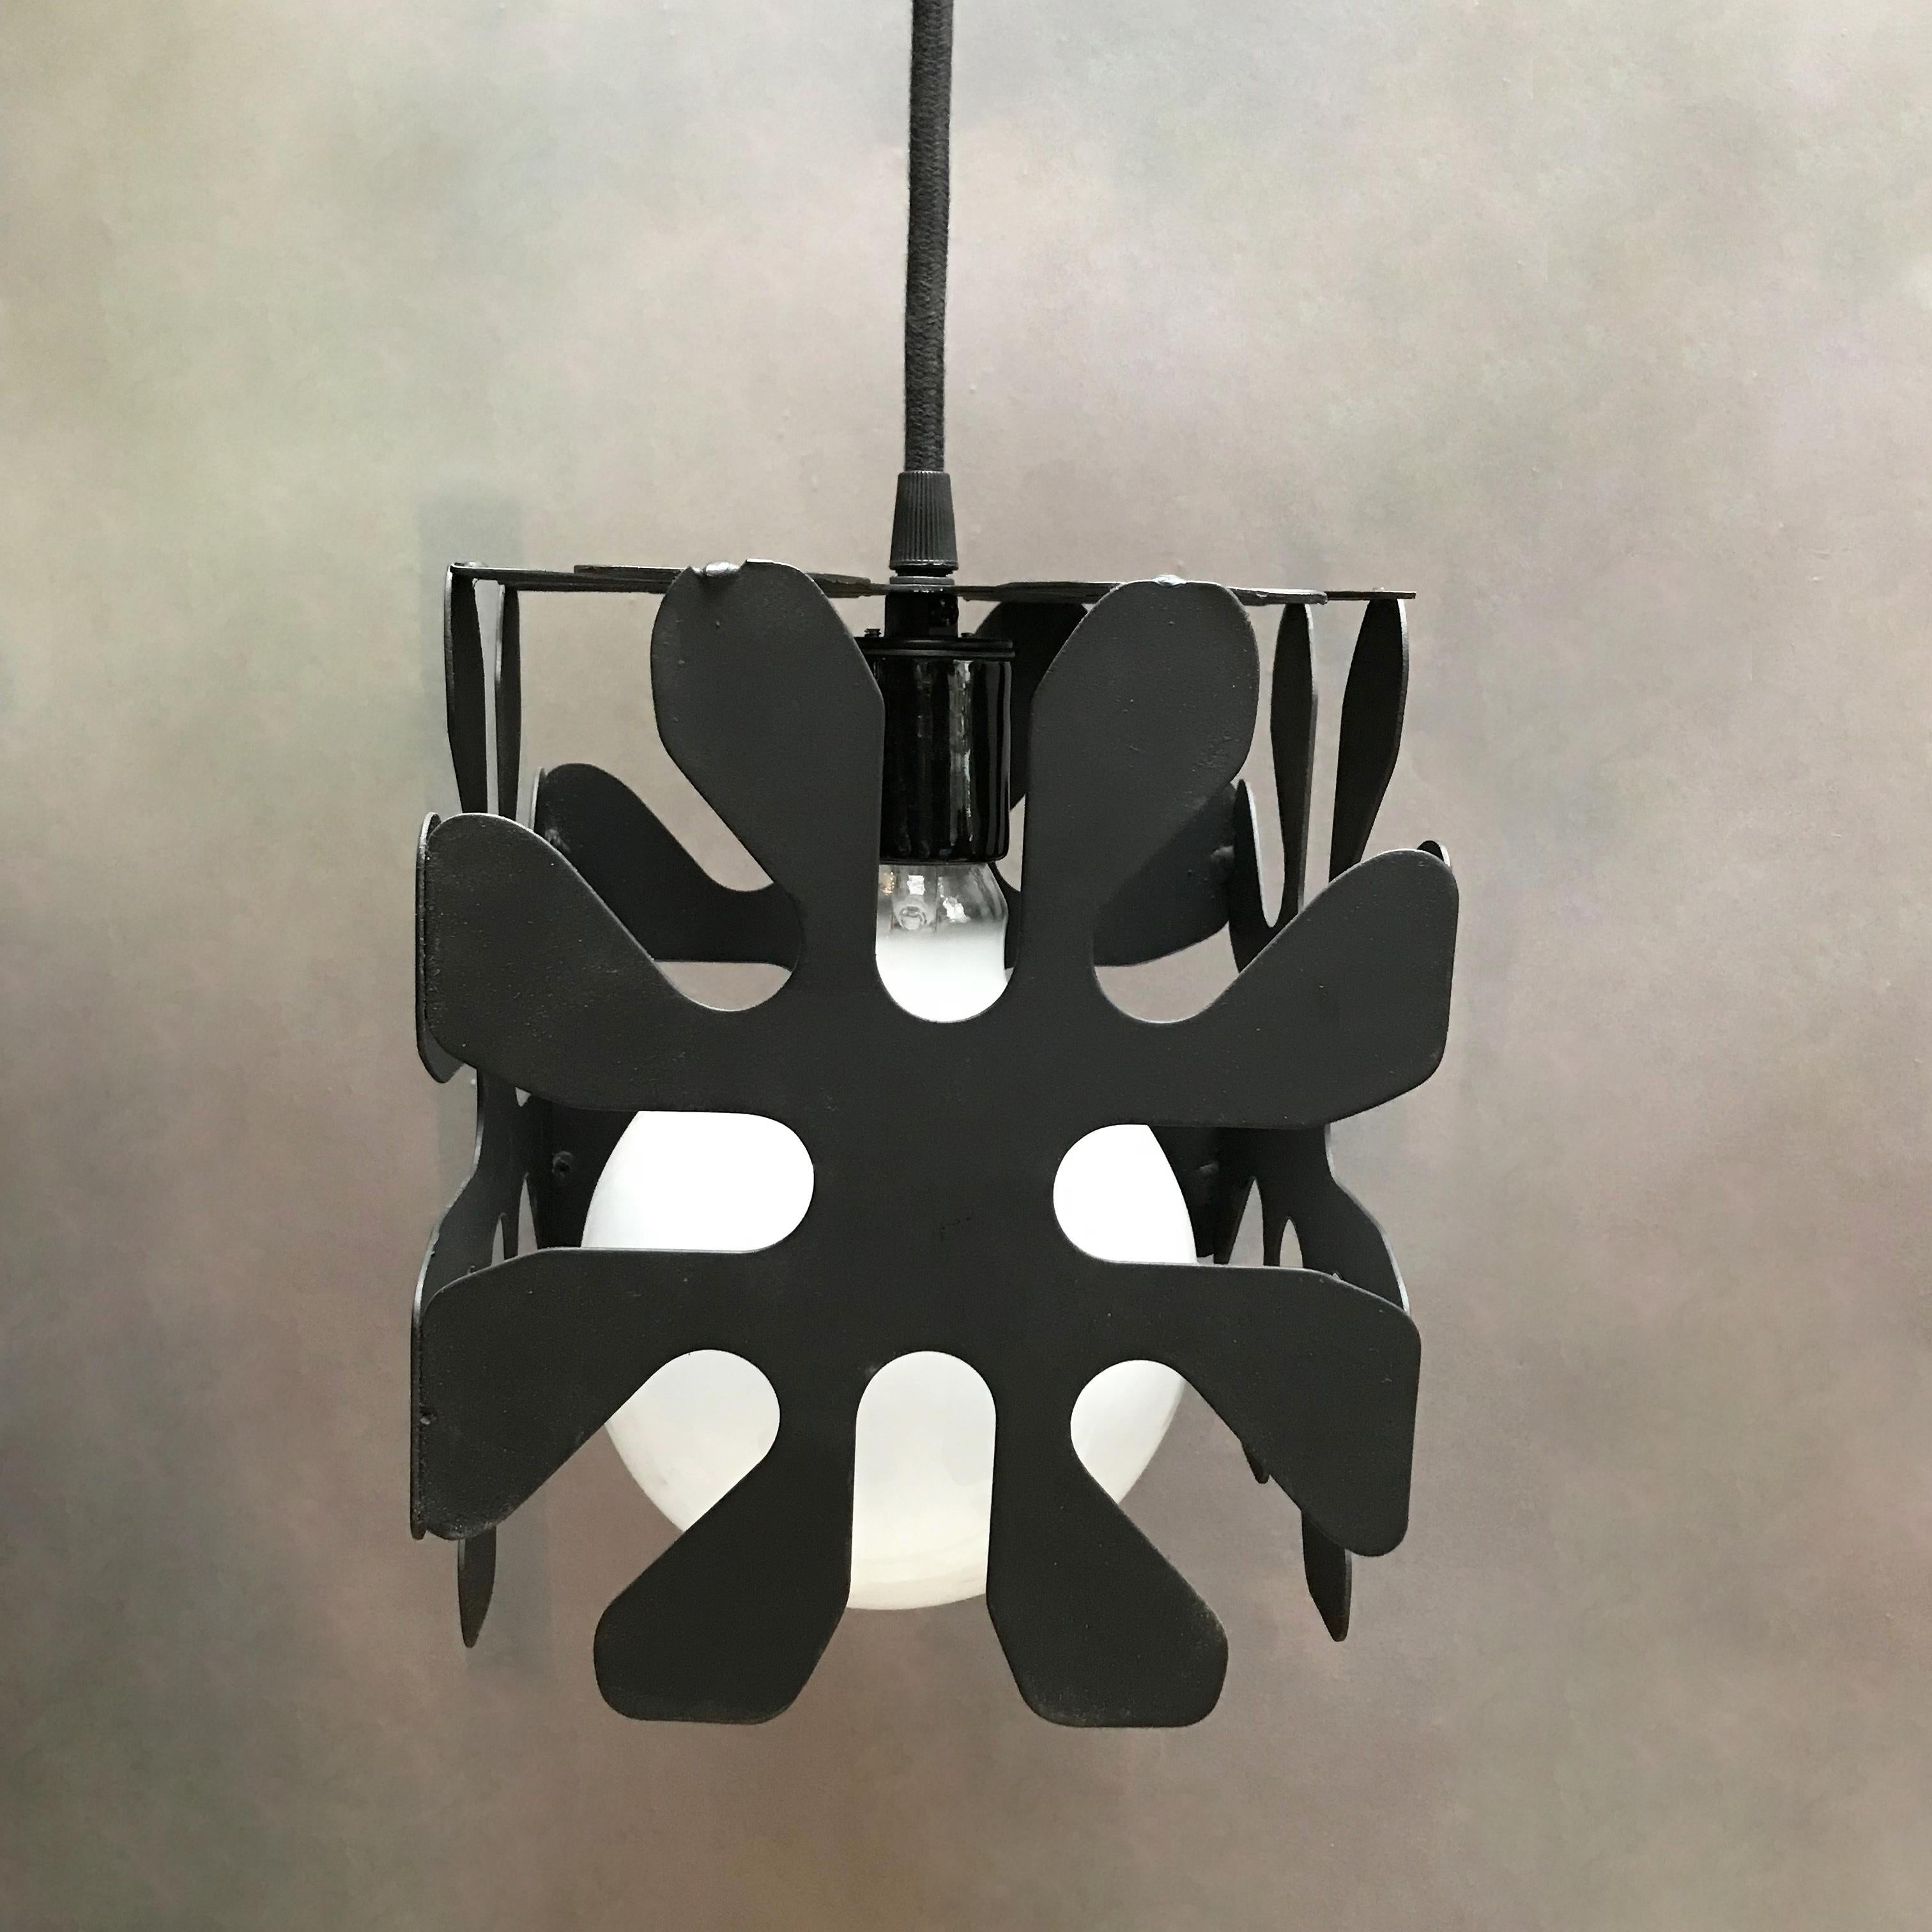 American Mid-Century Modern Wrought Iron Cubed Flower Pendant Light For Sale